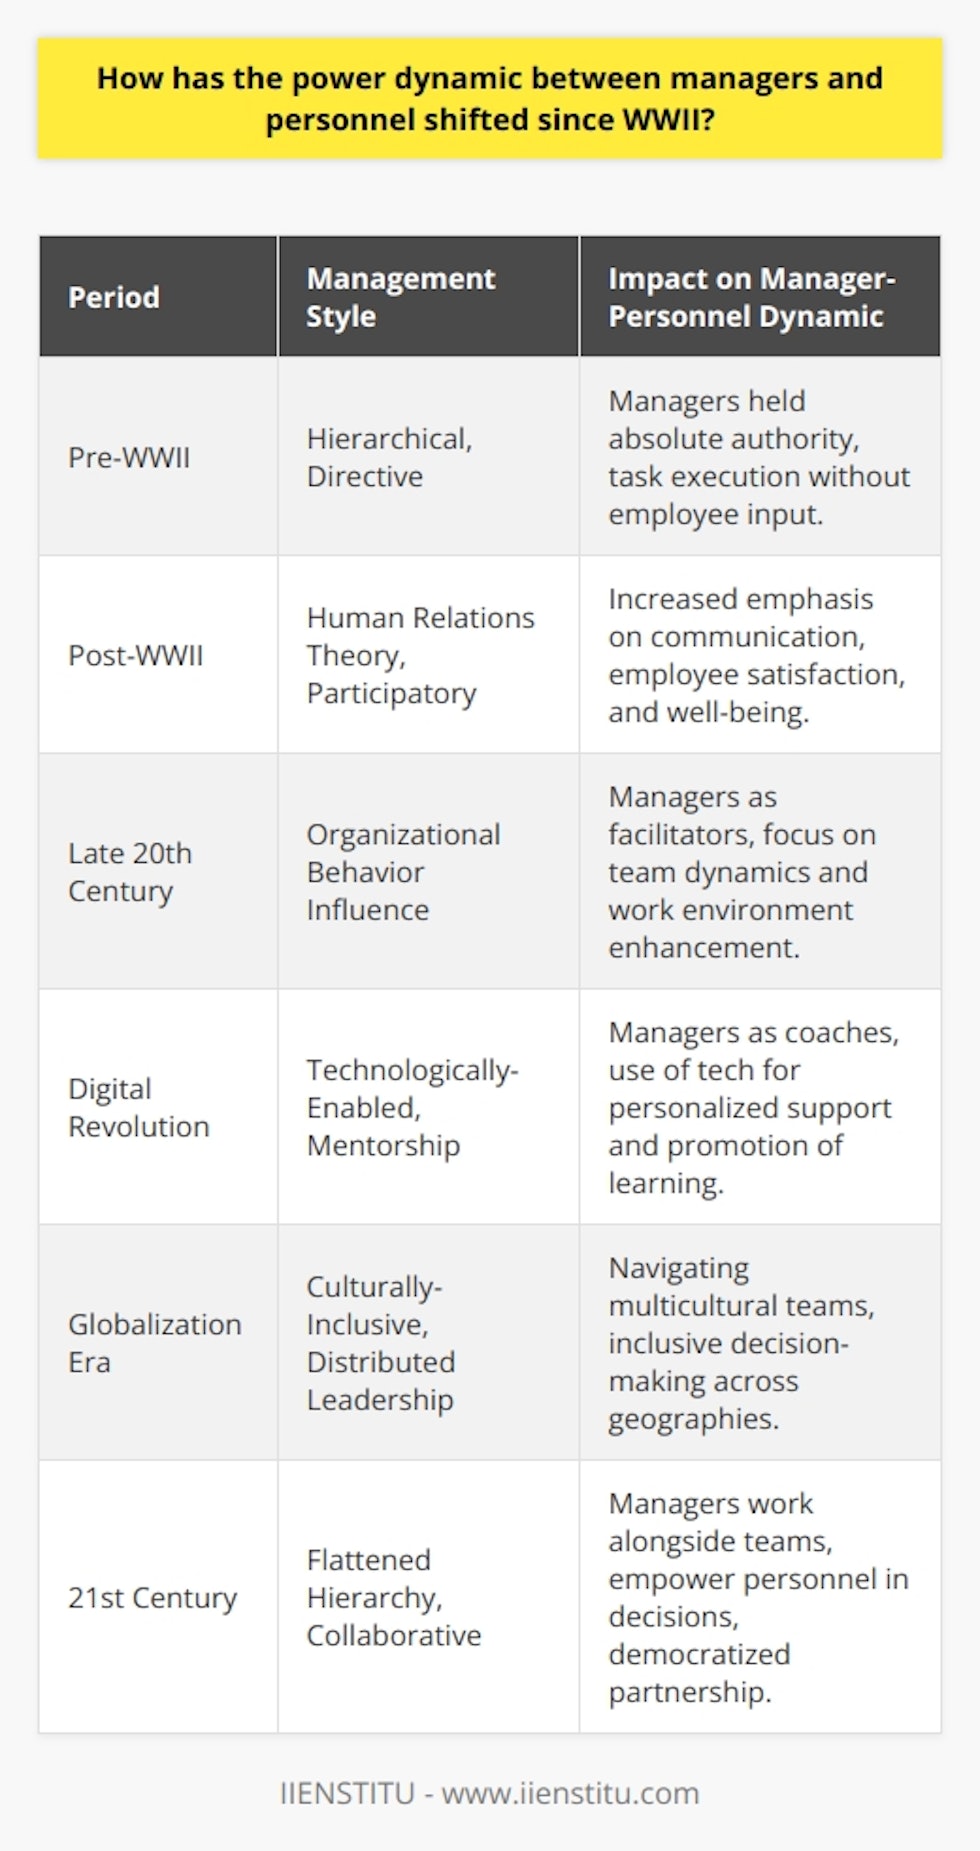 Since the end of World War II, the power dynamic between managers and their personnel has undergone significant shifts, driven by a variety of factors ranging from evolving management theories to technological advancements and the globalization of business practices.In the pre-WWII era, management structures were predominantly hierarchical, with clear lines of authority and a top-down approach to task delegation and decision-making. Managers issued directives, and employees were expected to follow without question—a model that fit well within the industrial age, where routine, standardized tasks dominated the workplace.The decades following the war saw considerable shifts in ideology about workplace management, particularly with the introduction of human relations theory. This theory posited that employee satisfaction and well-being were critical to productivity, leading to a more participatory style of management. Managers began to place more emphasis on communication, motivation, and team dynamics.The rise of organizational behavior as a distinct field of study further reinforced this trend, advocating for a deeper understanding of how individuals and groups act within organizations. With these new insights, the role of the manager evolved from being a sole authority figure to a facilitator of team performance and enhancer of the work environment.Advancements in technology further redefined the traditional manager-personnel dynamic. The digital revolution brought about tools for effective communication, real-time data analysis, and collaborative platforms. As personnel became more tech-savvy, they gained greater autonomy to manage their tasks, and the role of the manager transitioned to that of a coach or mentor—who utilizes technology to provide more personalized support and foster a culture of continuous learning and improvement.Globalization has also compelled managers to adapt to a more nuanced set of skills. They must now navigate a multicultural workforce, respect diverse work practices, and lead teams that may be spread across continents and time zones. This cultural shift requires a managerial capacity that values inclusivity and the unique contributions of a diverse personnel body.As organizations continue to adapt to the fast-paced changes of the 21st century, the power dynamic between managers and personnel is witnessing a further shift towards a flattened hierarchy. Modern managers often work alongside their teams, harness the collective intelligence, and empower personnel by involving them in the decision-making process.In sum, the manager-personnel relationship has evolved from one of command and control to a more democratized and symbiotic partnership. Today's managers are expected not only to lead but also to listen, empathize, and collaborate with their personnel. As these trends continue, both managers and personnel are embracing new opportunities for growth and innovation within the workplace.